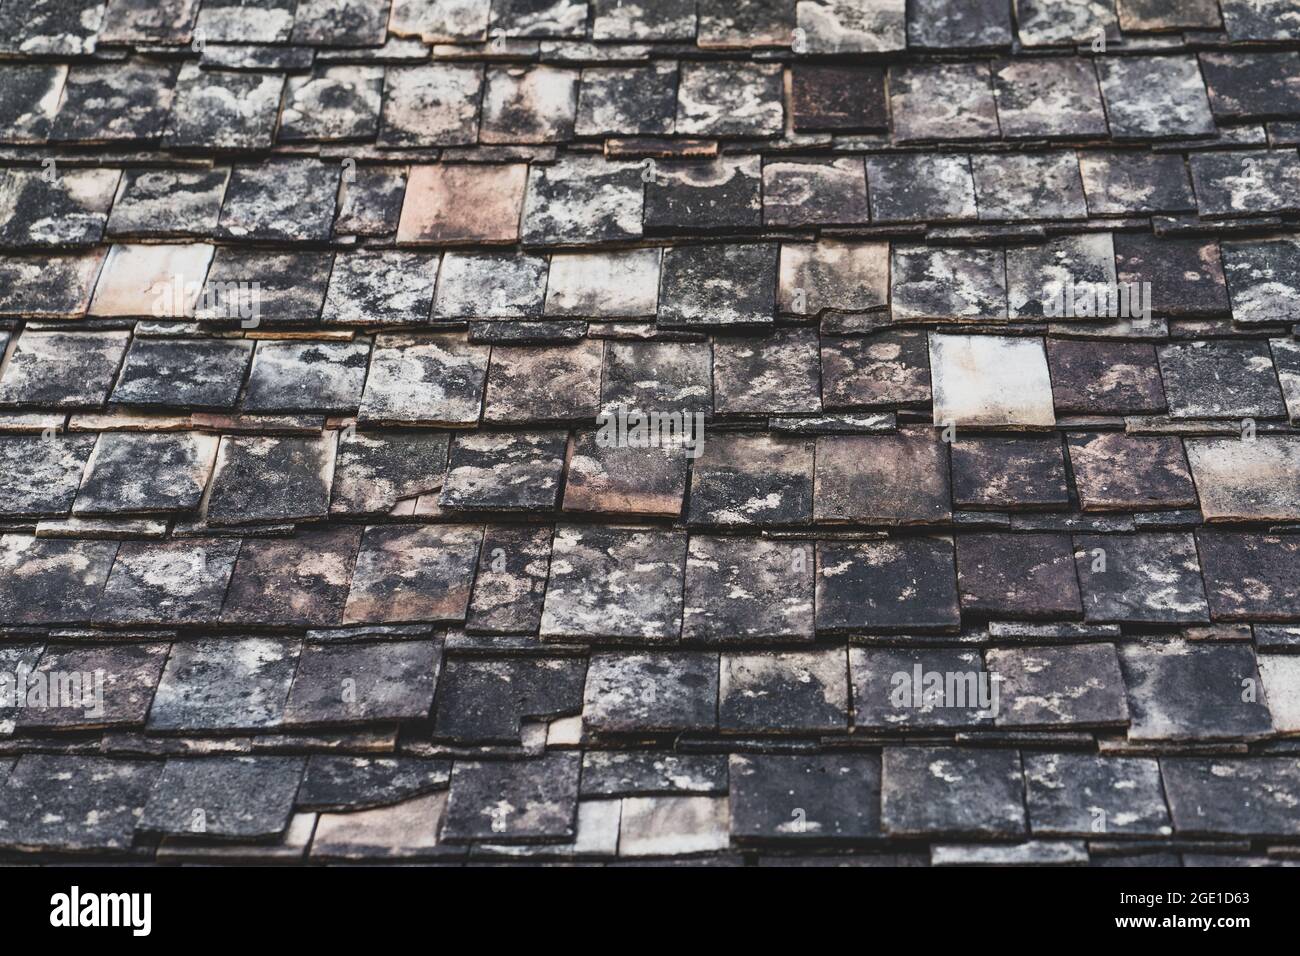 Old grunge roof tiles background texture Stock Photo